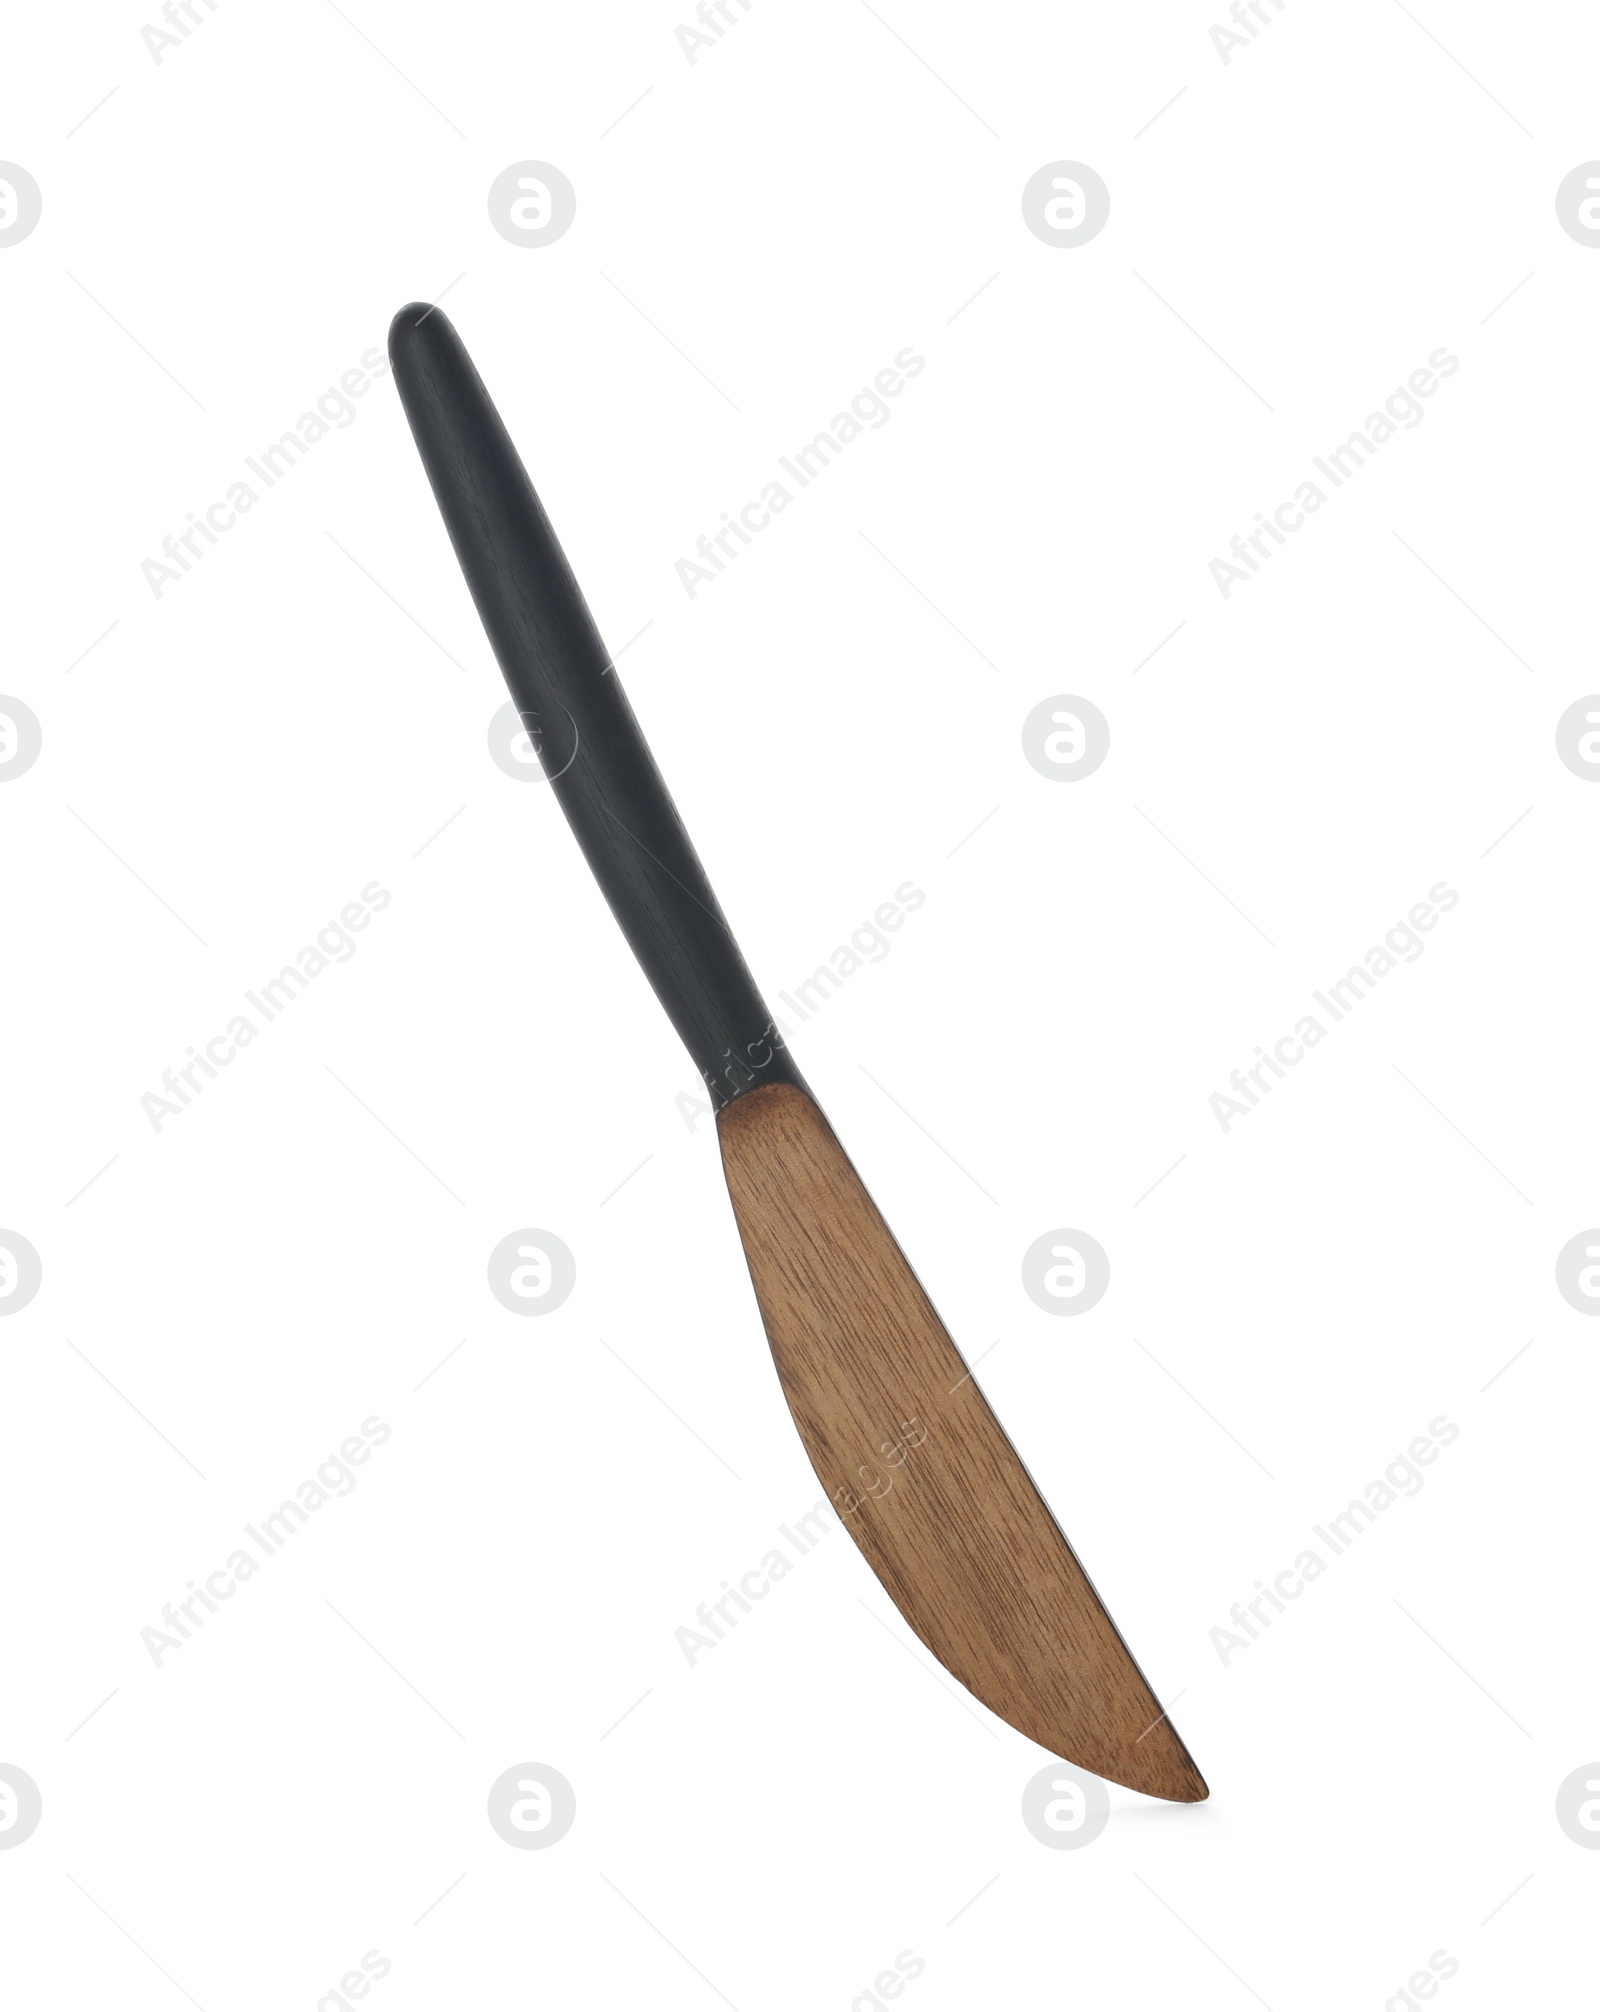 Photo of New wooden butter knife on white background